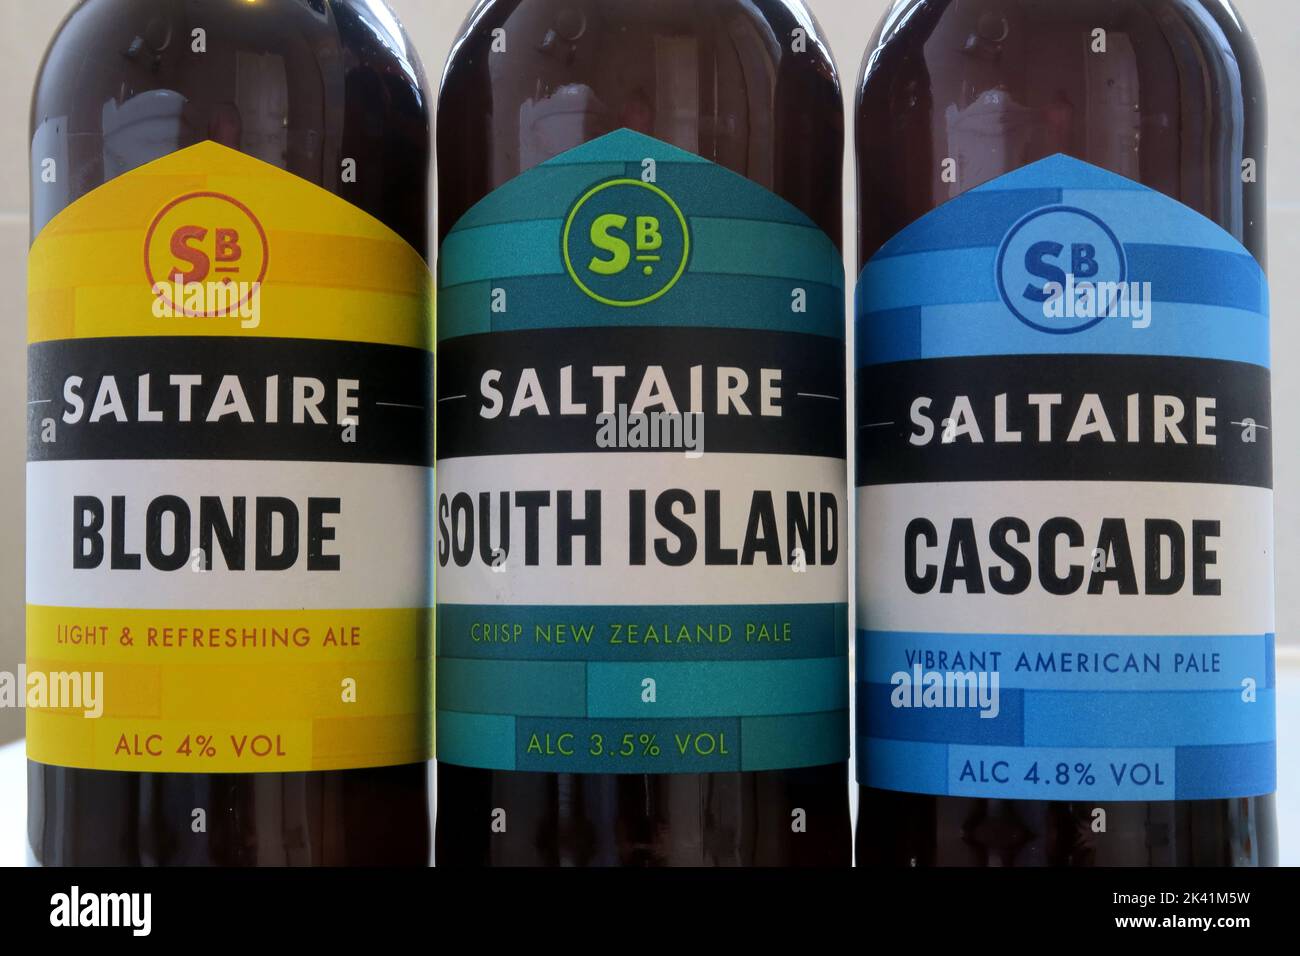 Saltaire Brewery Beers, Shipley, Yorkshire, Blonde, South Island, Überlappend Stockfoto